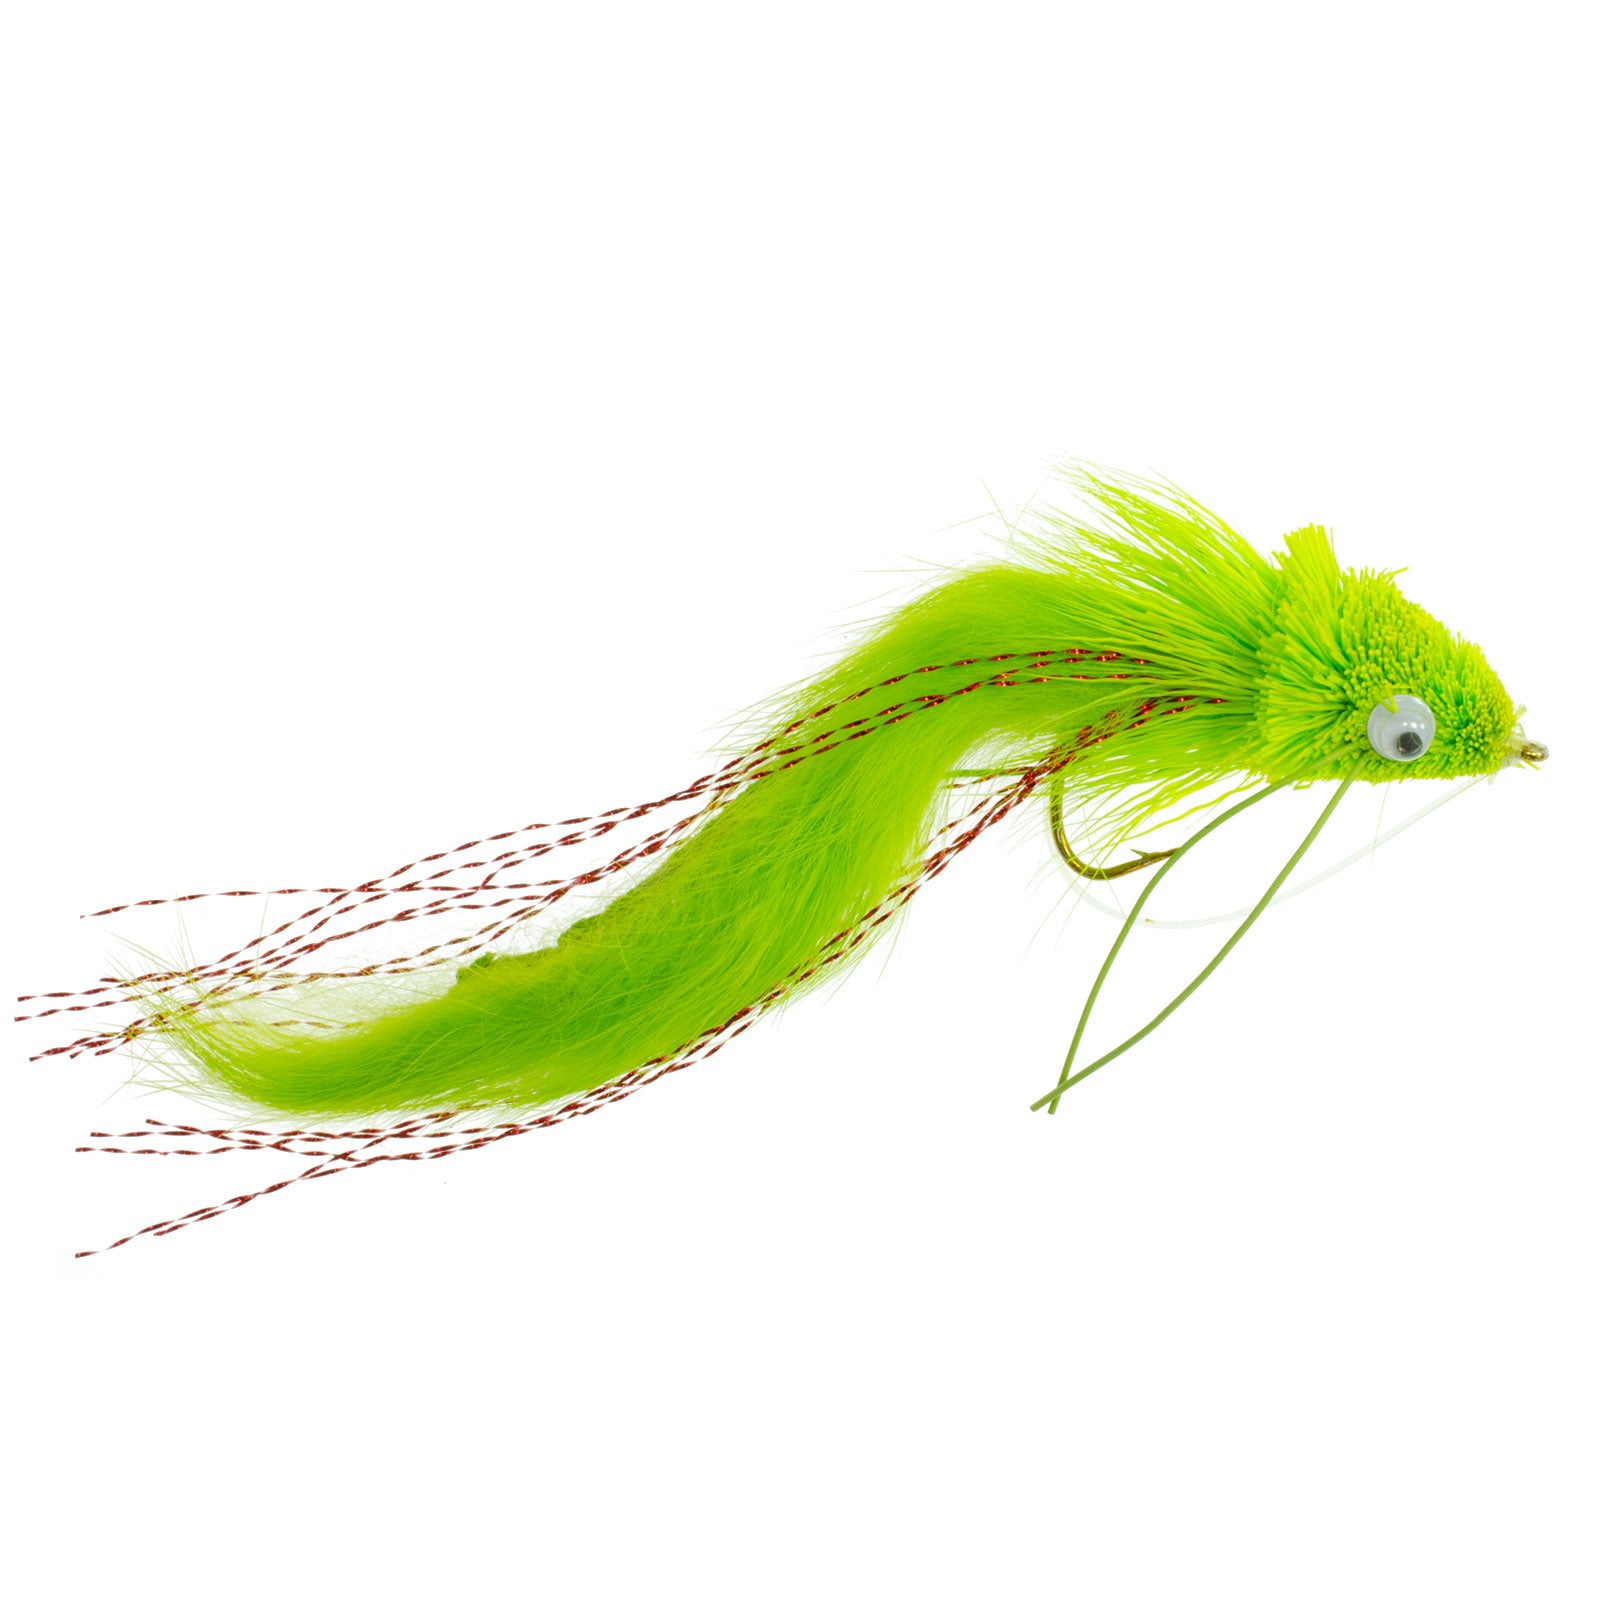  Wild Water Fly Fishing Black Rabbit Tail Diver Deer Hair Flies  for Largemouth Bass, Northern Pike, Smallmouth Bass, Trout, Size 1/0, 2  Pack : Dry Terrestrial Fishing Flies : Sports & Outdoors